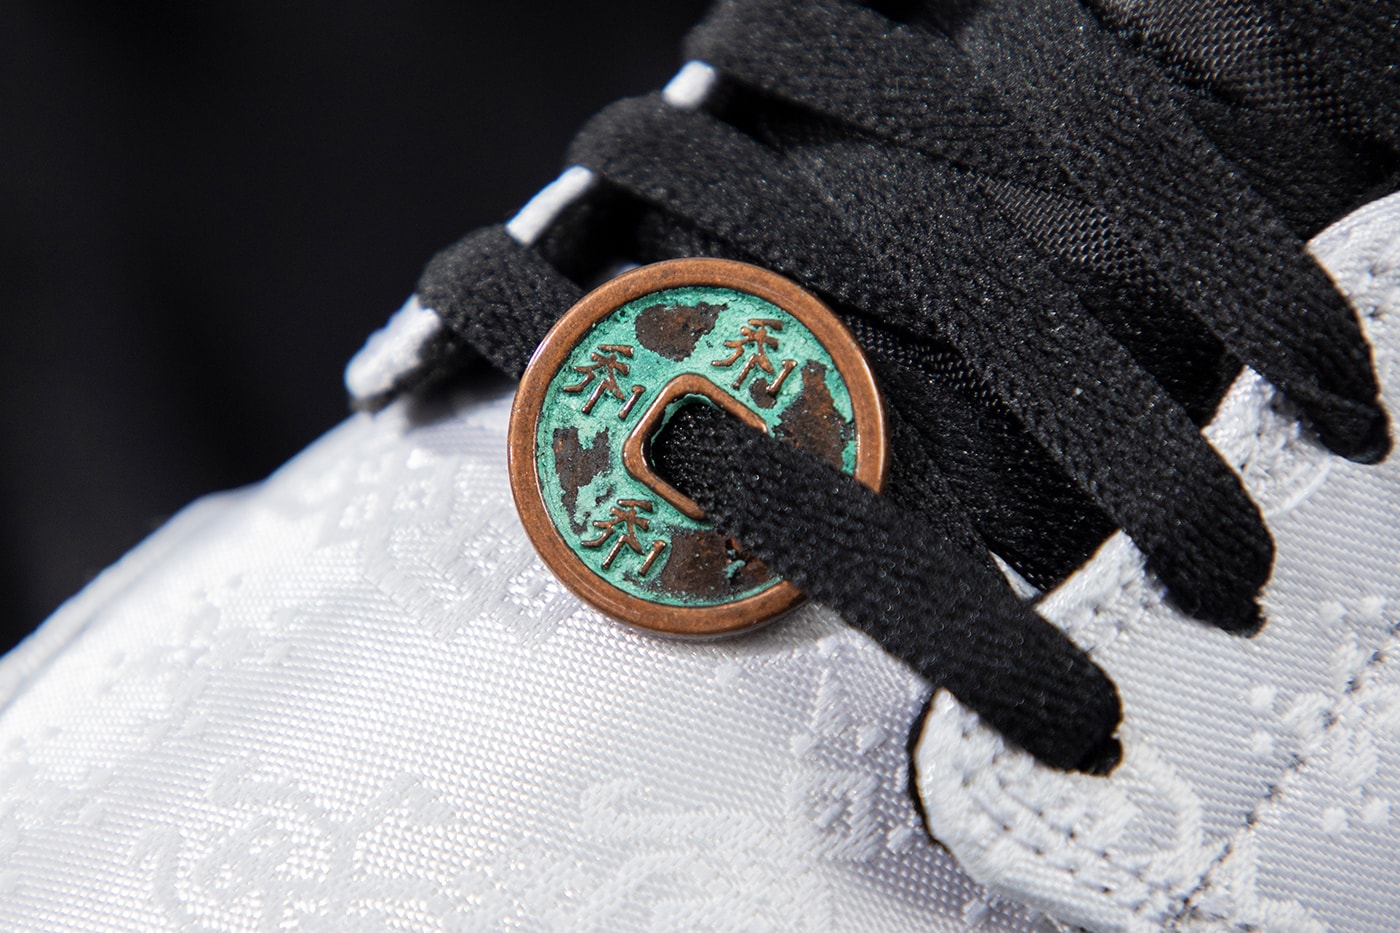 Edison Chen Air Jordan 1 Mid Fearless Closer Look Release Info Date Buy White Gold